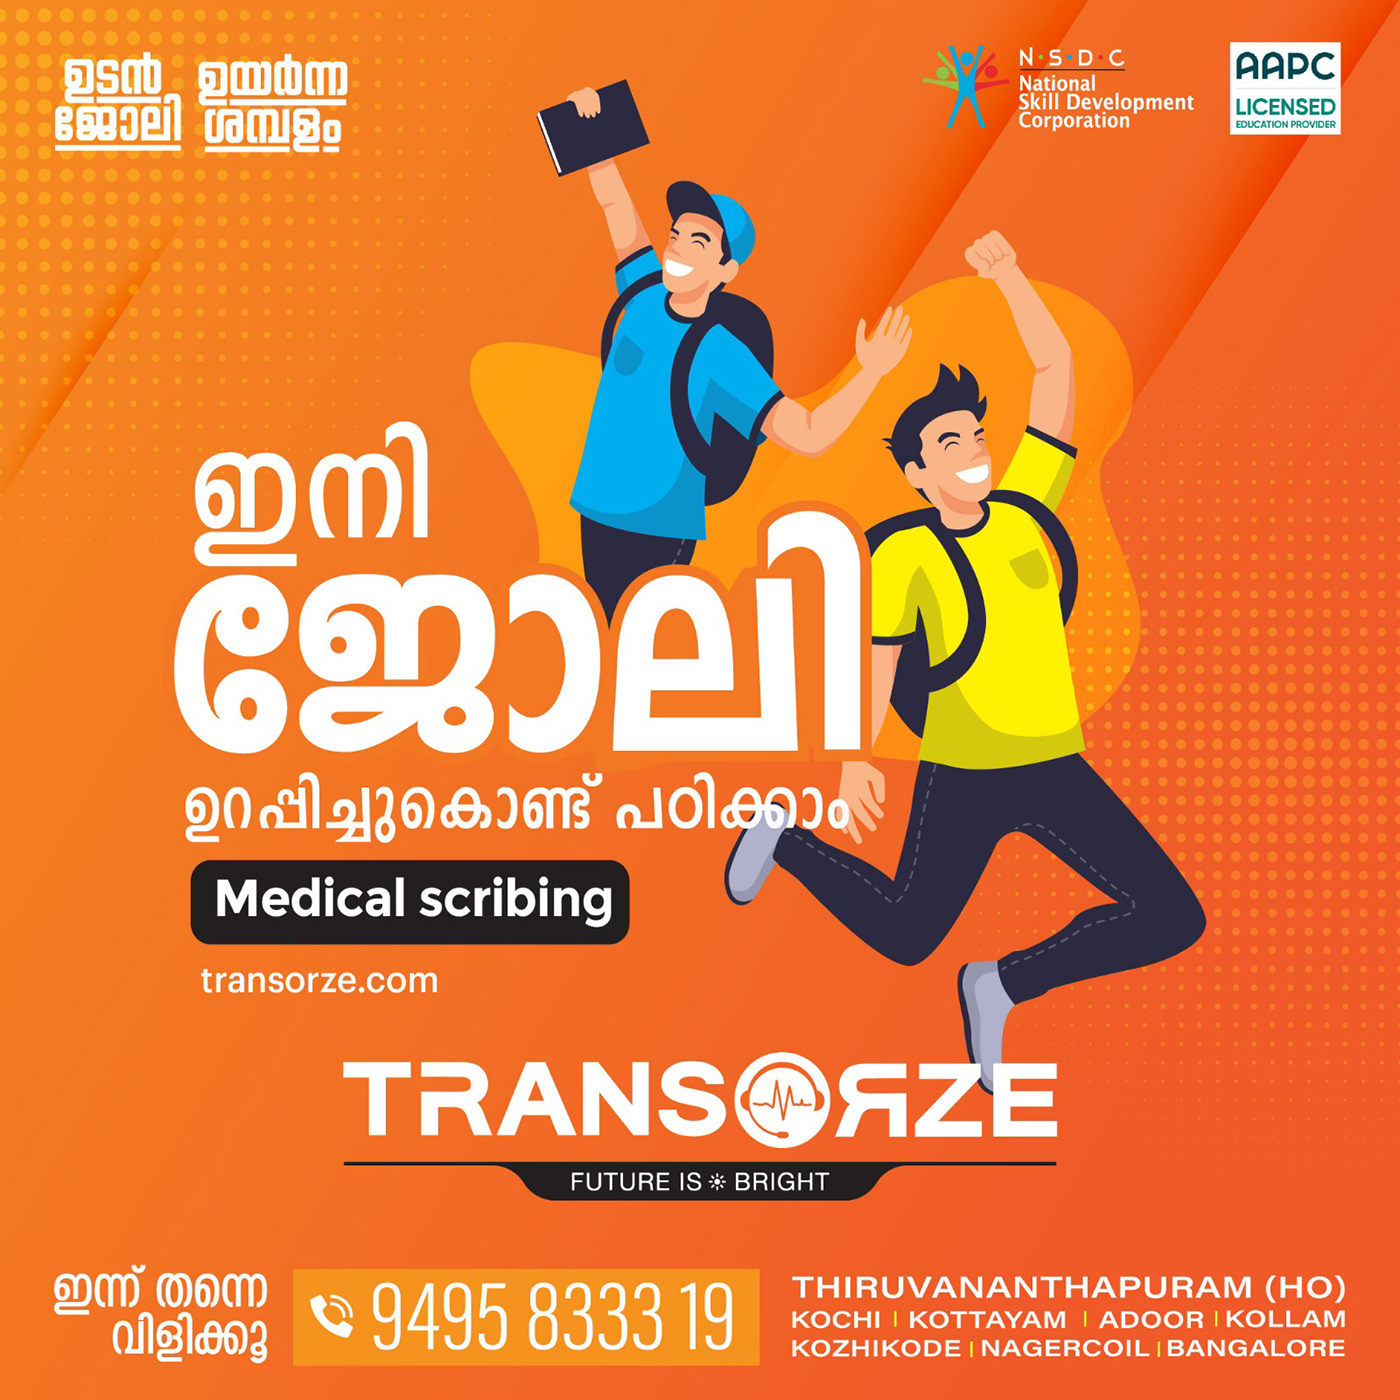 medical scribing scribe training institute calicut Graduates collages Jobs placements